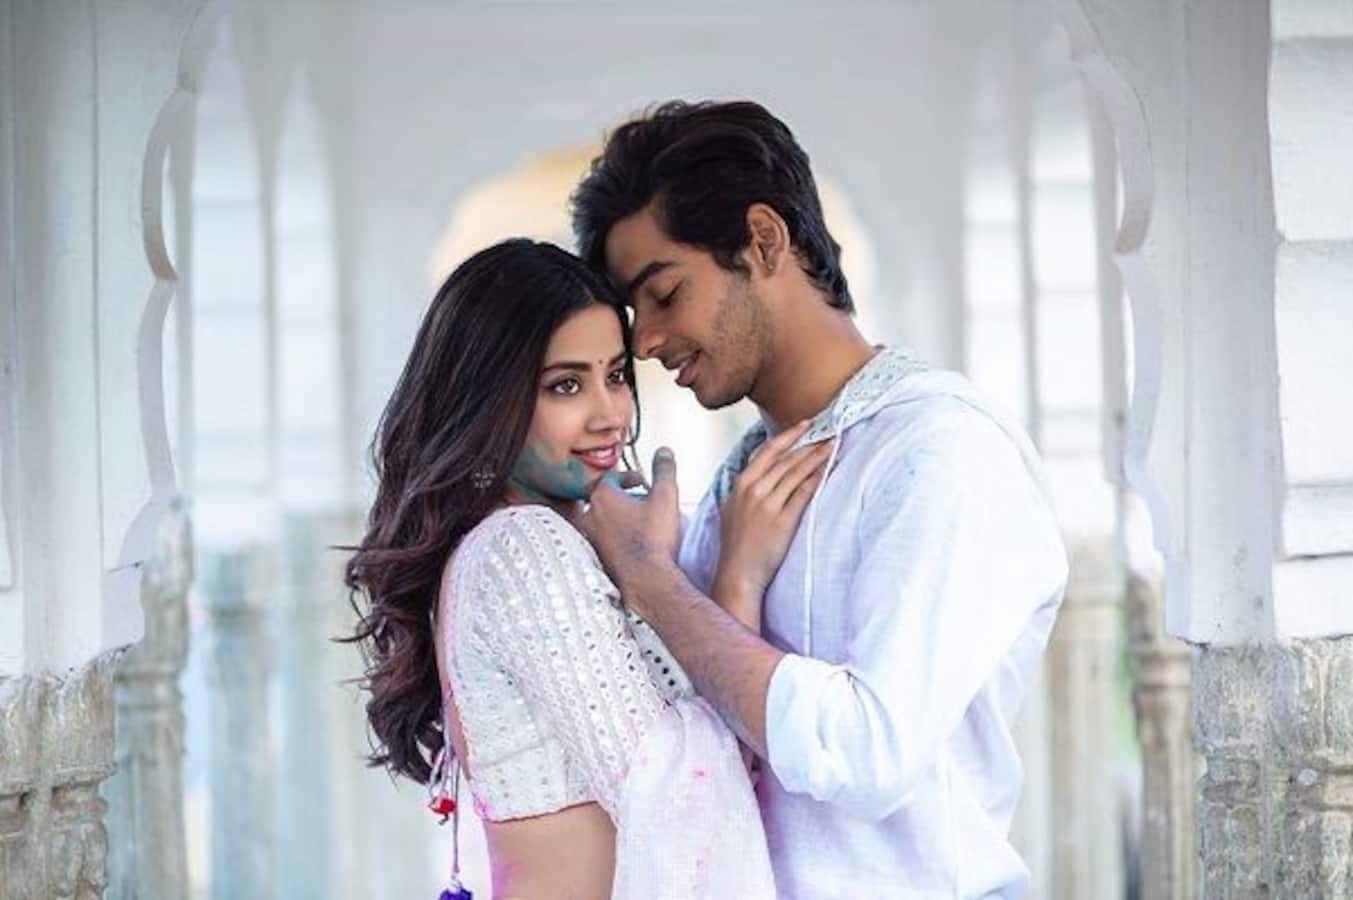 Dhadak box office collection day 6: Janhvi and Ishaan's film continues its steady run, rakes in Rs 48.01 crore